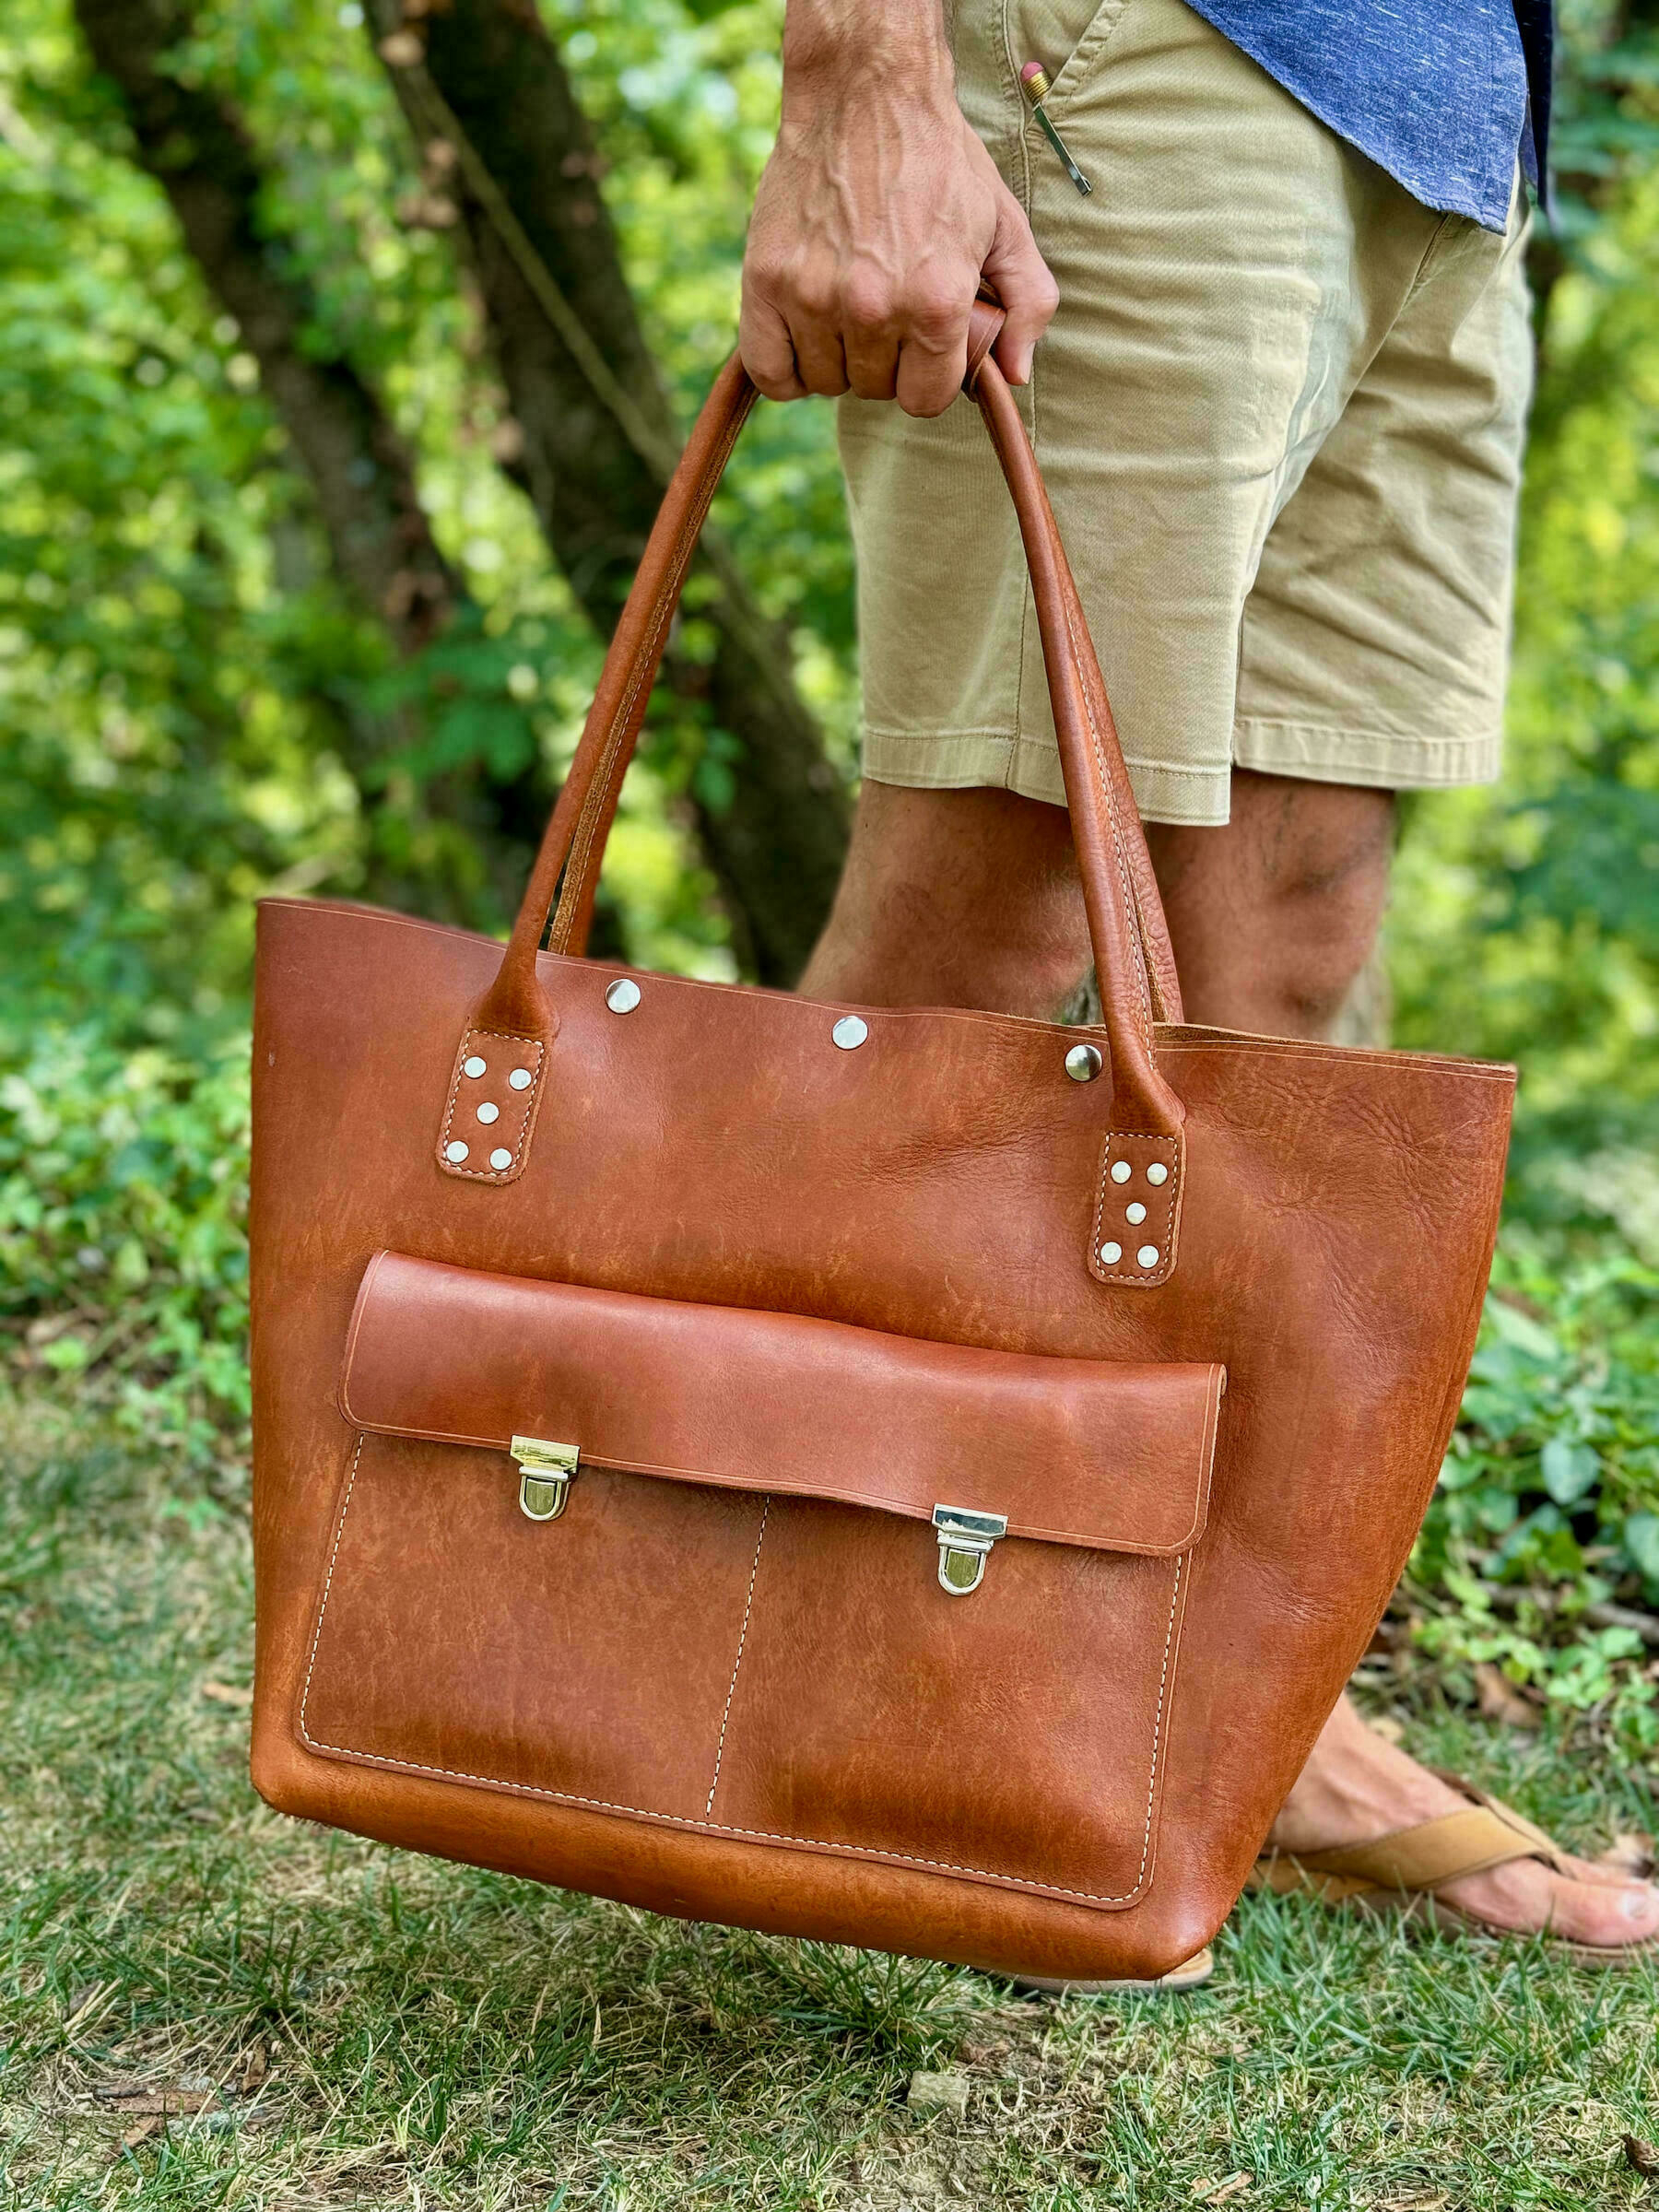 A person is holding a large brown leather tote bag outdoors, with trees and greenery in the background.